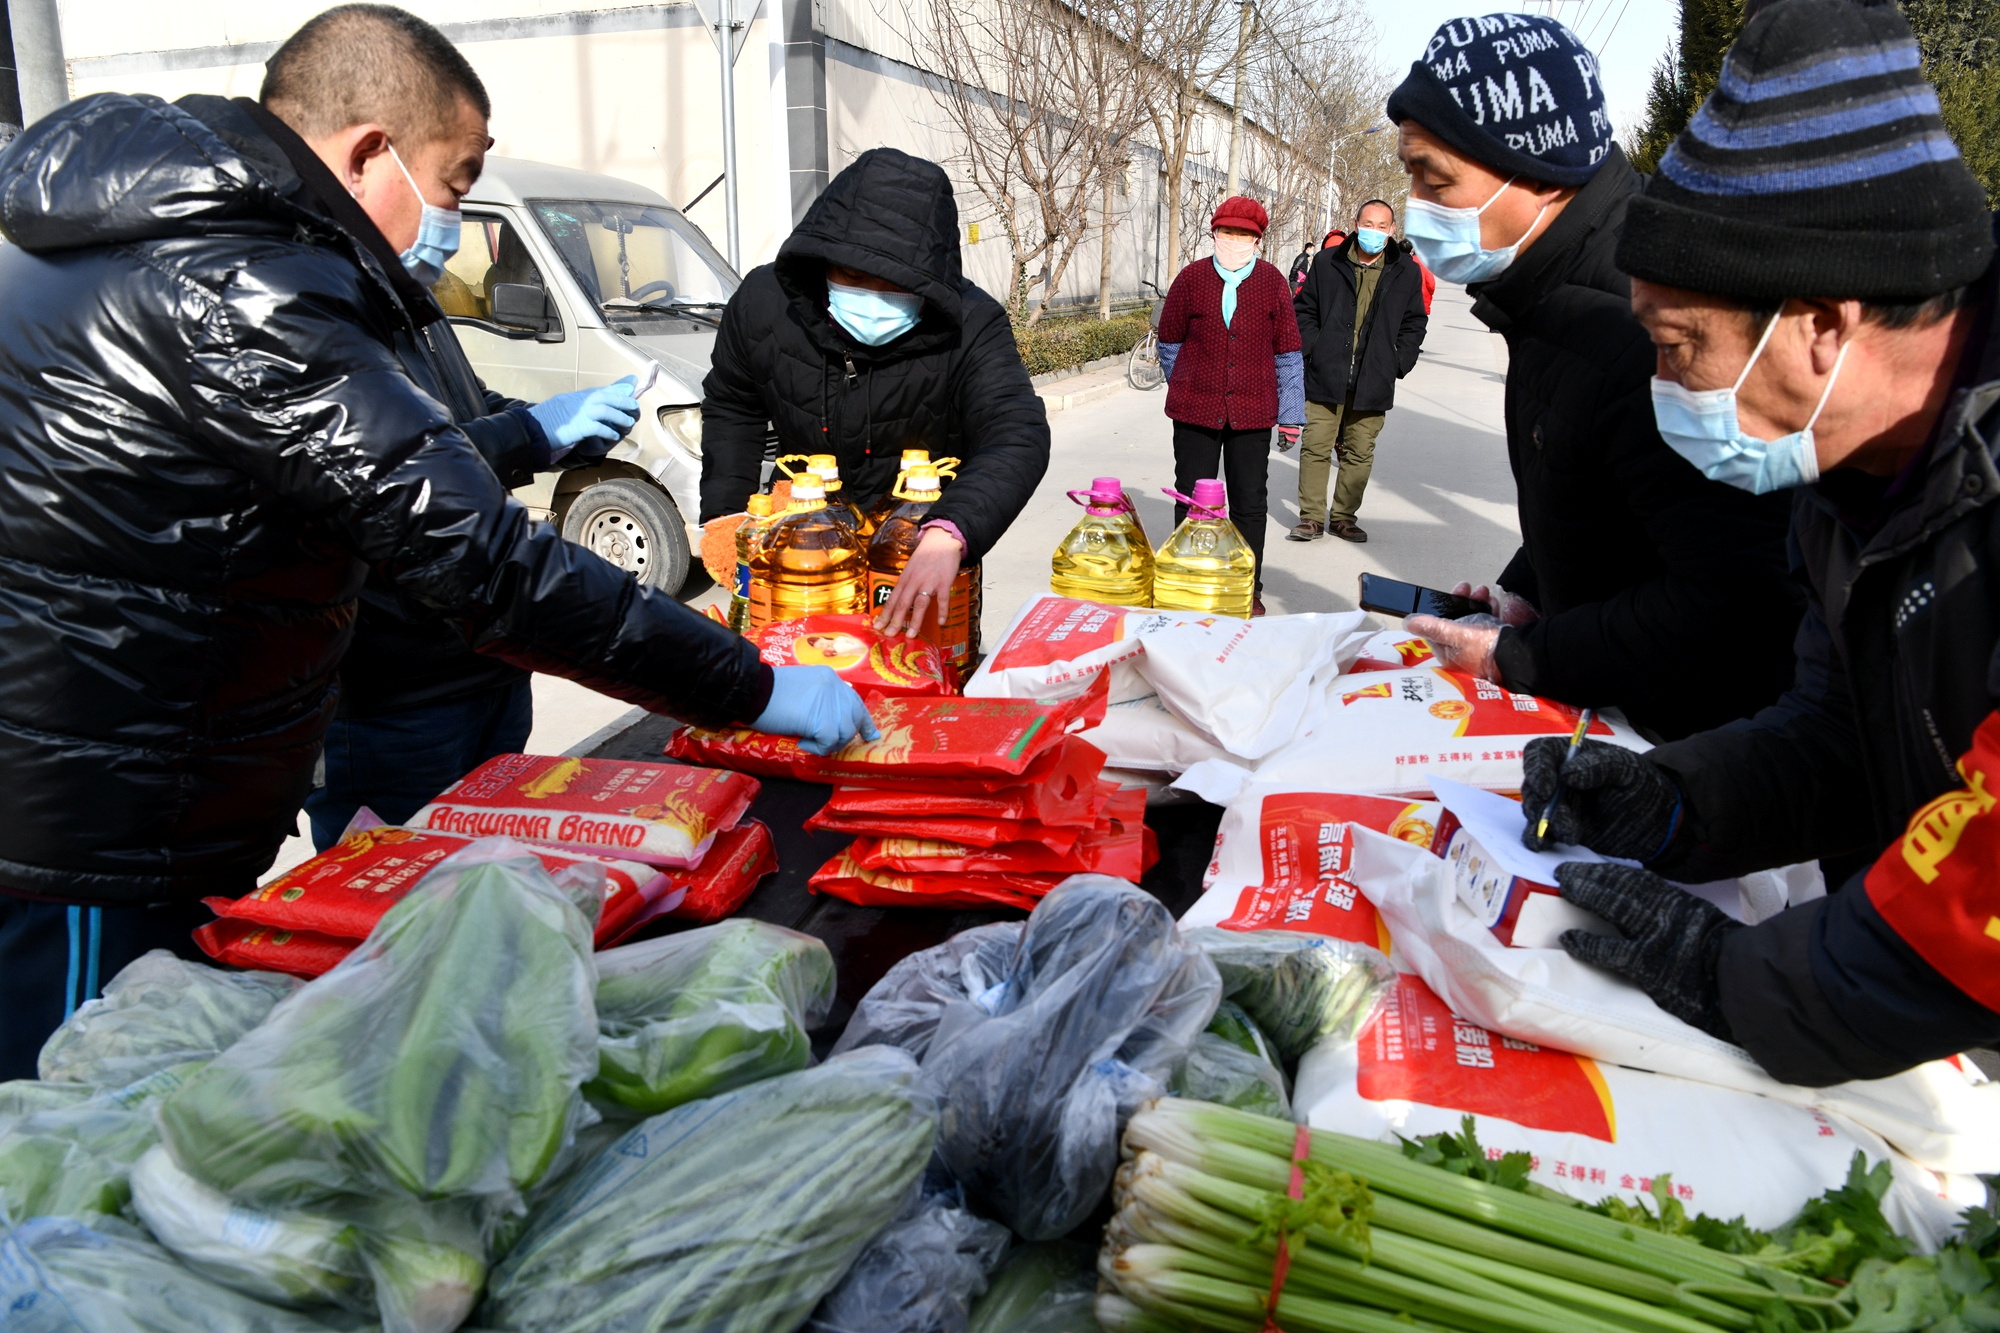 Volunteers distribute groceries to villagers at an entrance to Longhua village in Shijiazhuang